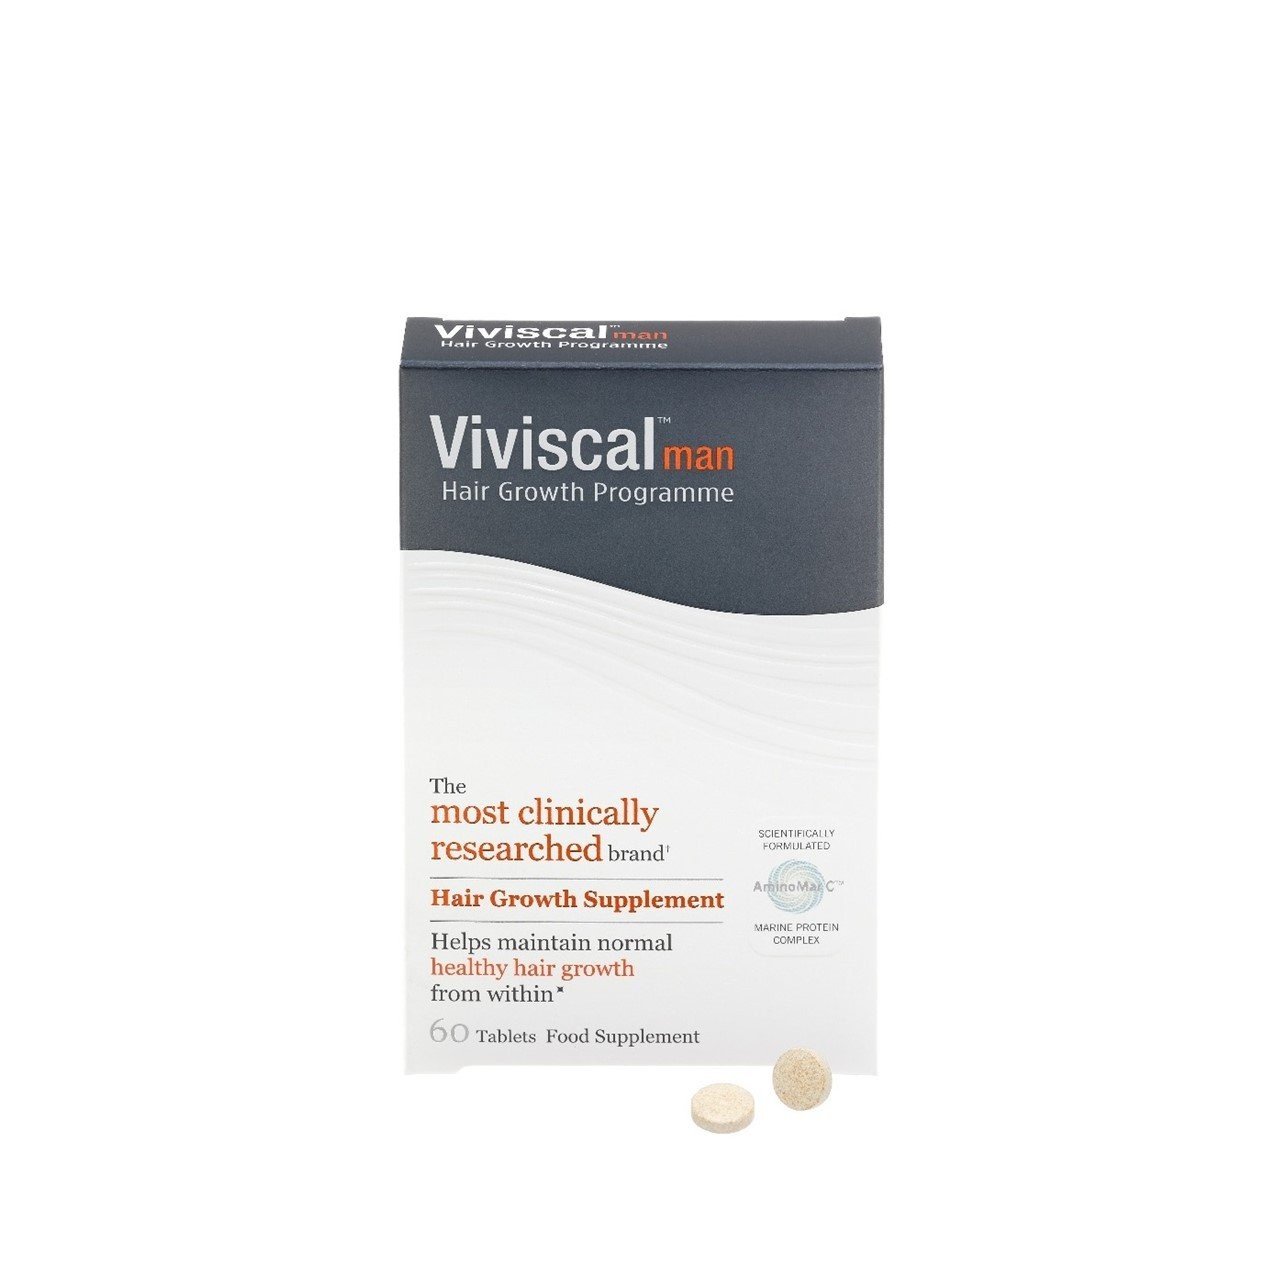 Buy Bundle 1 Viviscal Hair Growth Program Extra Strength 60 Tabs  1  Pillbox Online at Low Prices in India  Amazonin